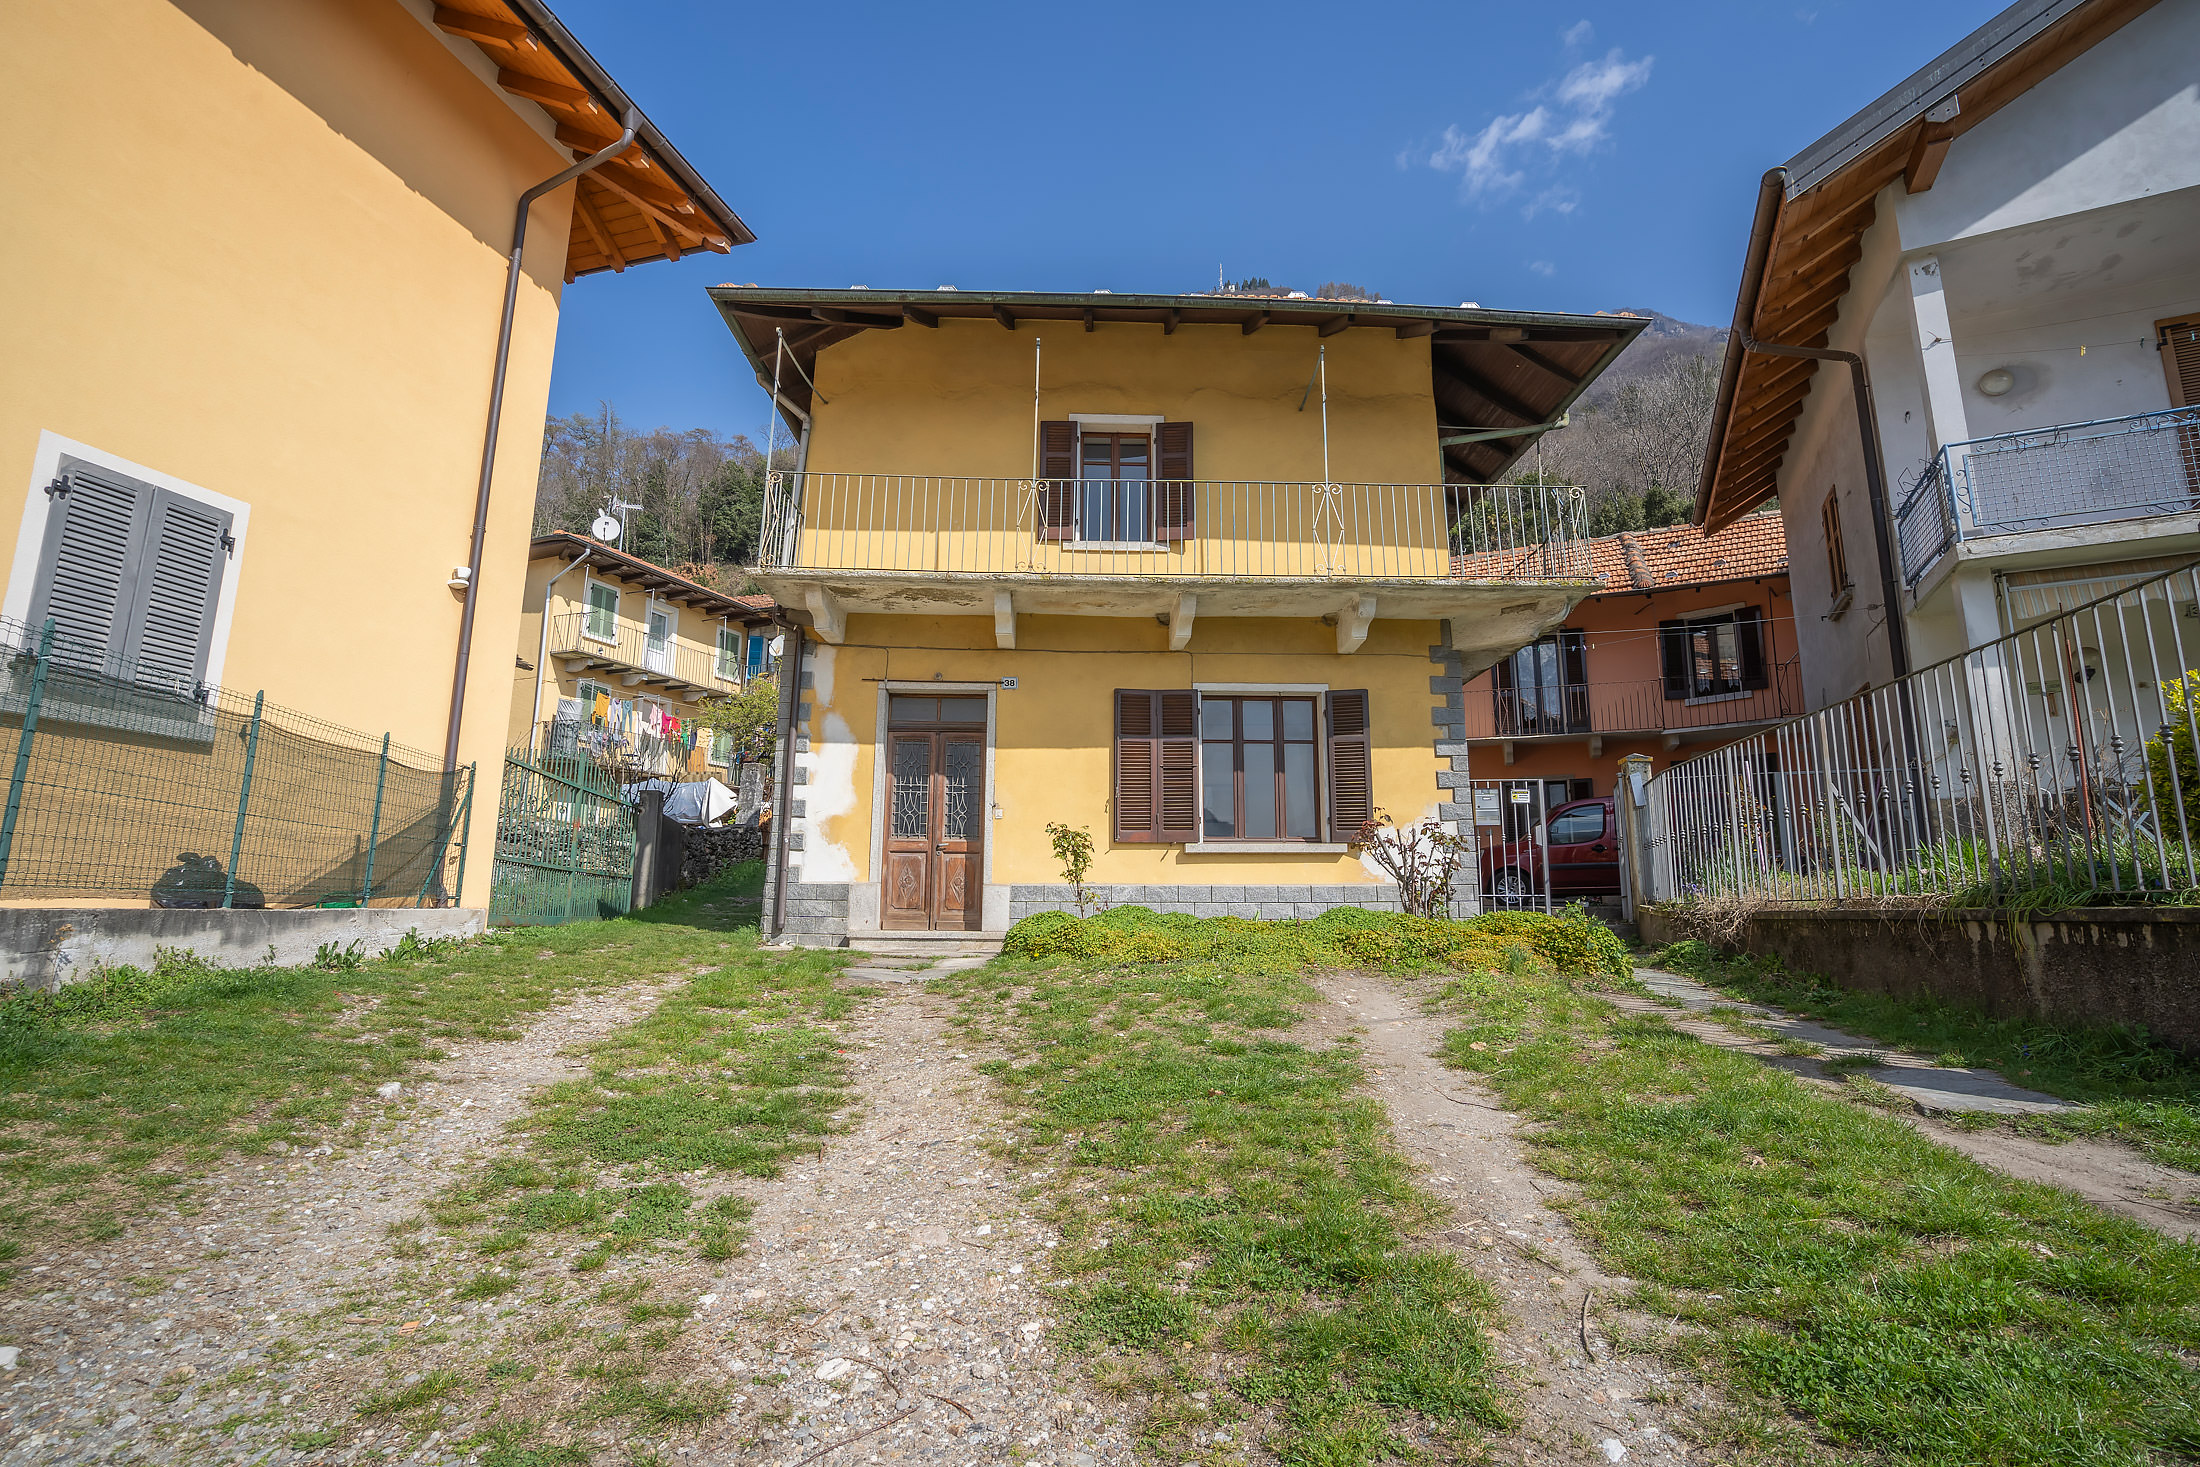 MERGOZZO Two-storey detached house with private courtyard